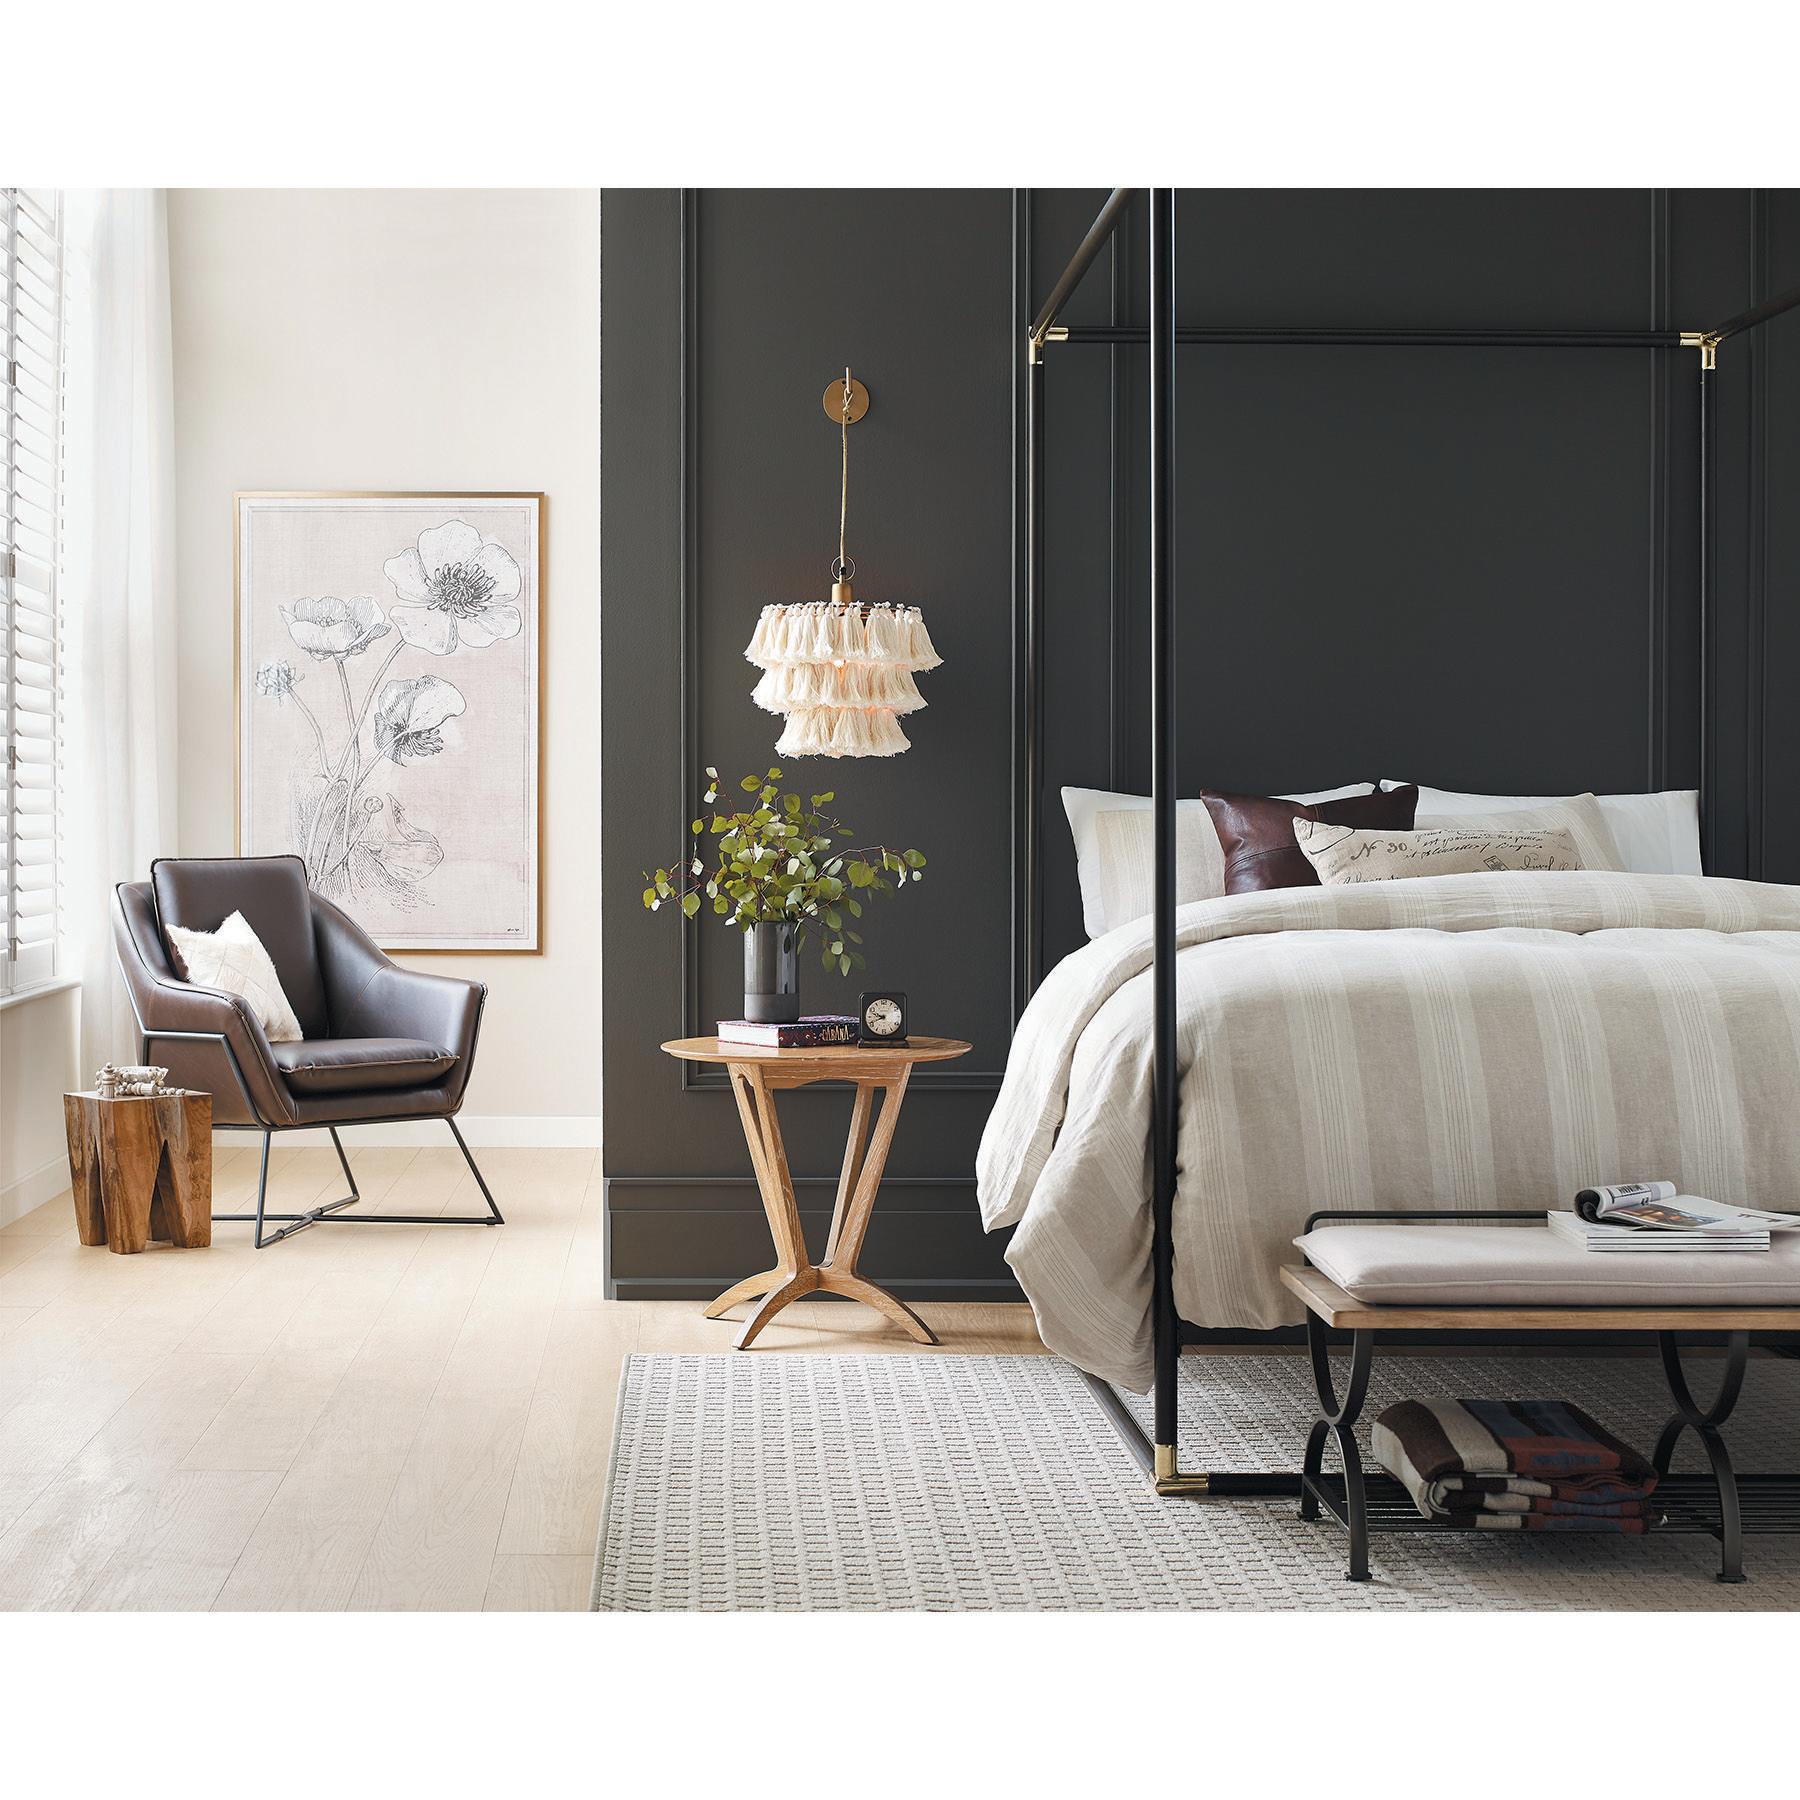 Interior Designers Name the Top Paint Colors for 2021